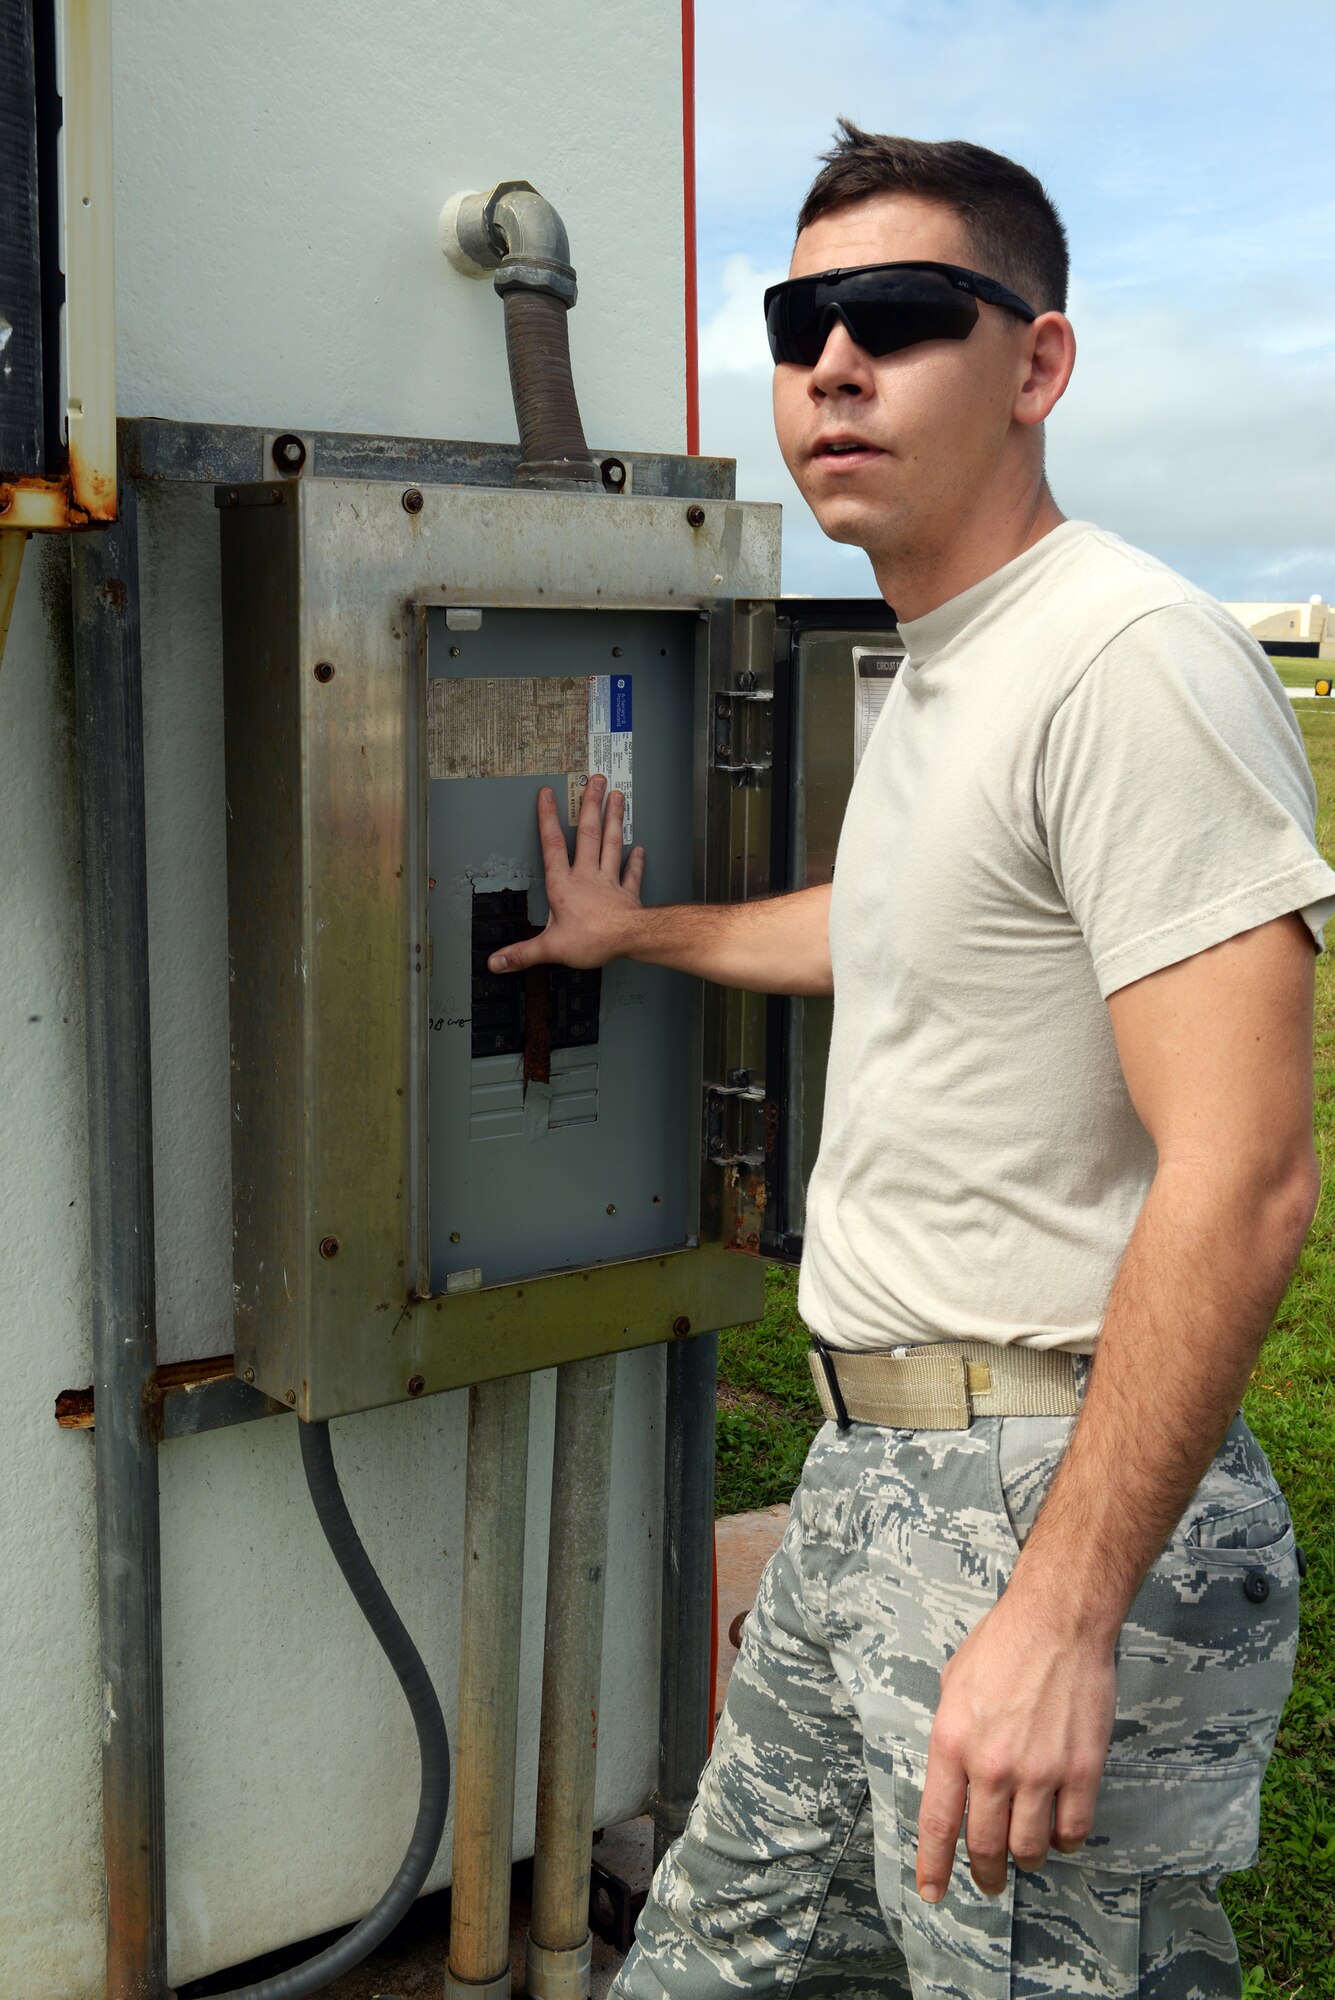 Senior Airman Patrick Duffie, 36th Operations Support Squadron airfield systems technician, flips breaker switches to ensure power is being properly dispersed to the wind bird, a wind sensor, June 2, 2015, at Andersen Air Force Base, Guam. The technicians guarantee safe landings everyday by performing routine checks on essential equipment such as the glideslope, localizer, and TACAN or tactical air navigation. (U.S. Air Force photo by Senior Airman Amanda Morris/Released)